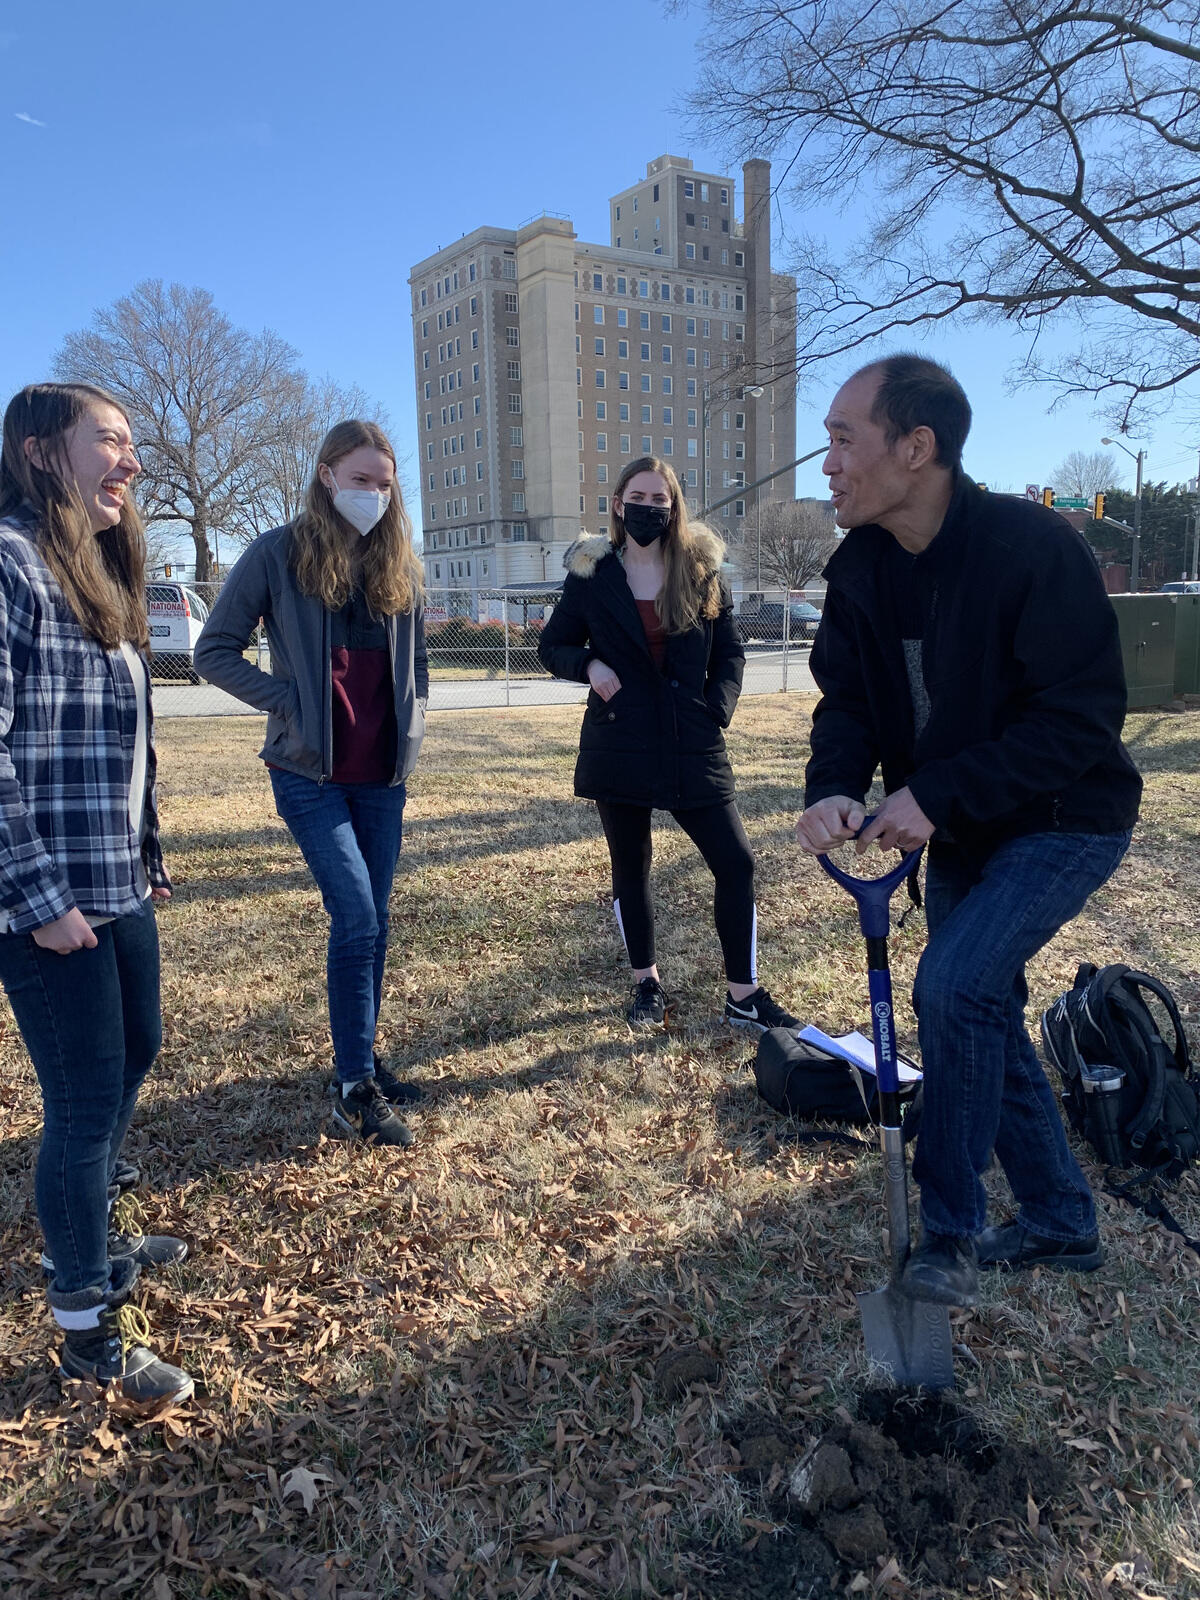 From left, students Emma Gregory, Alexandra Almasy and Tara Macintosh share a laugh with their professor Stephen Fong, Ph.D., as Fong digs into the ground in front of the Science Museum of Virginia.